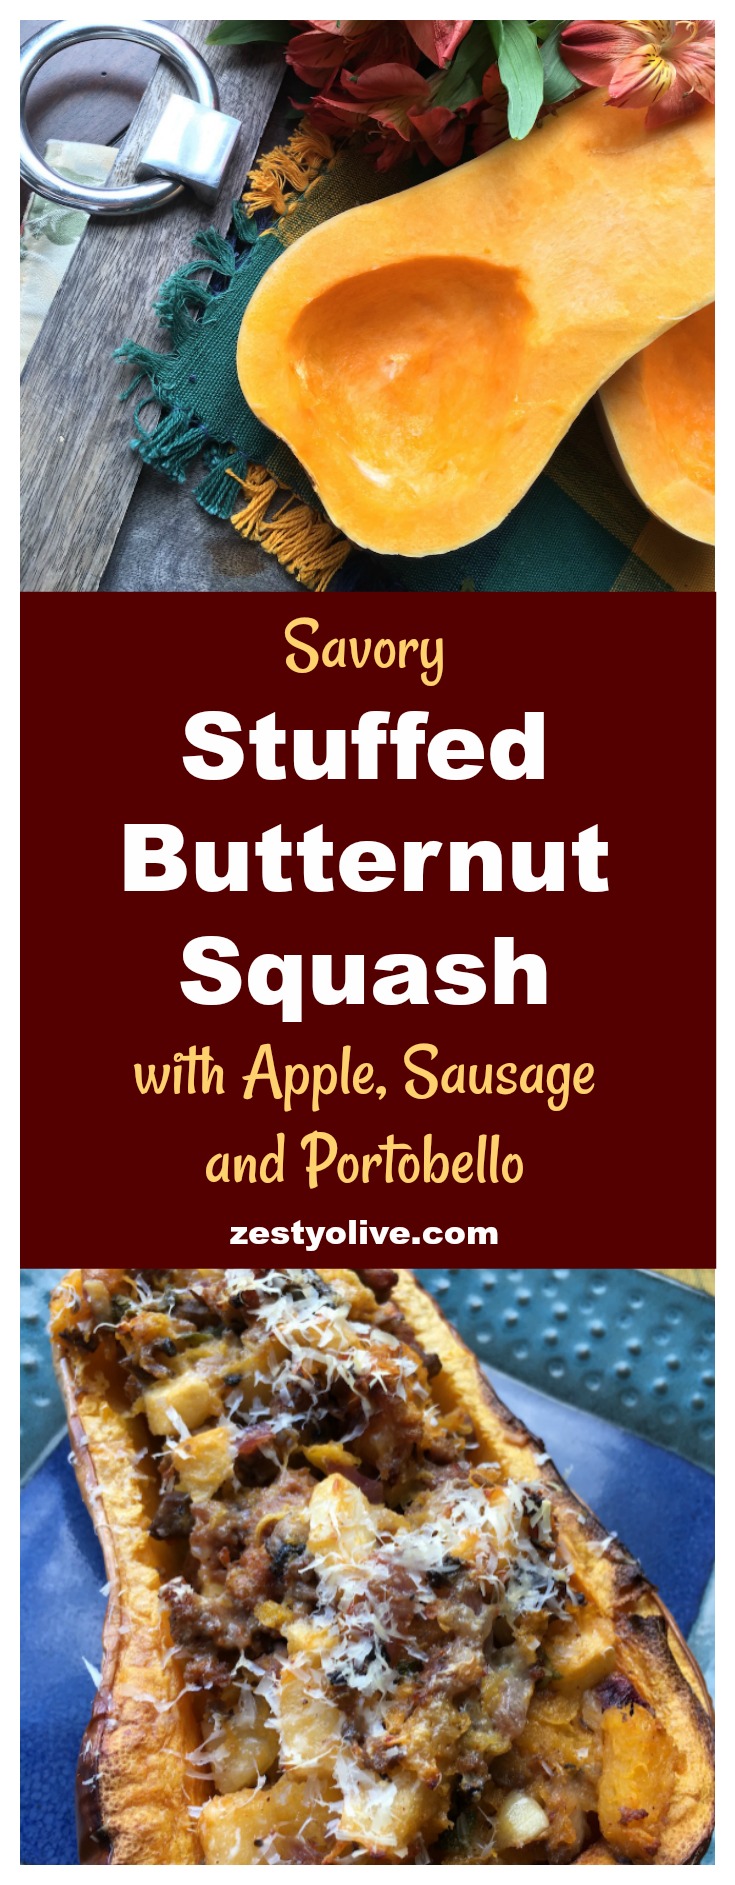 This savory Stuffed Butternut Squash with Apple, Sausage and Portobello is a must-have dish for your Thanksgiving and Christmas holiday table.